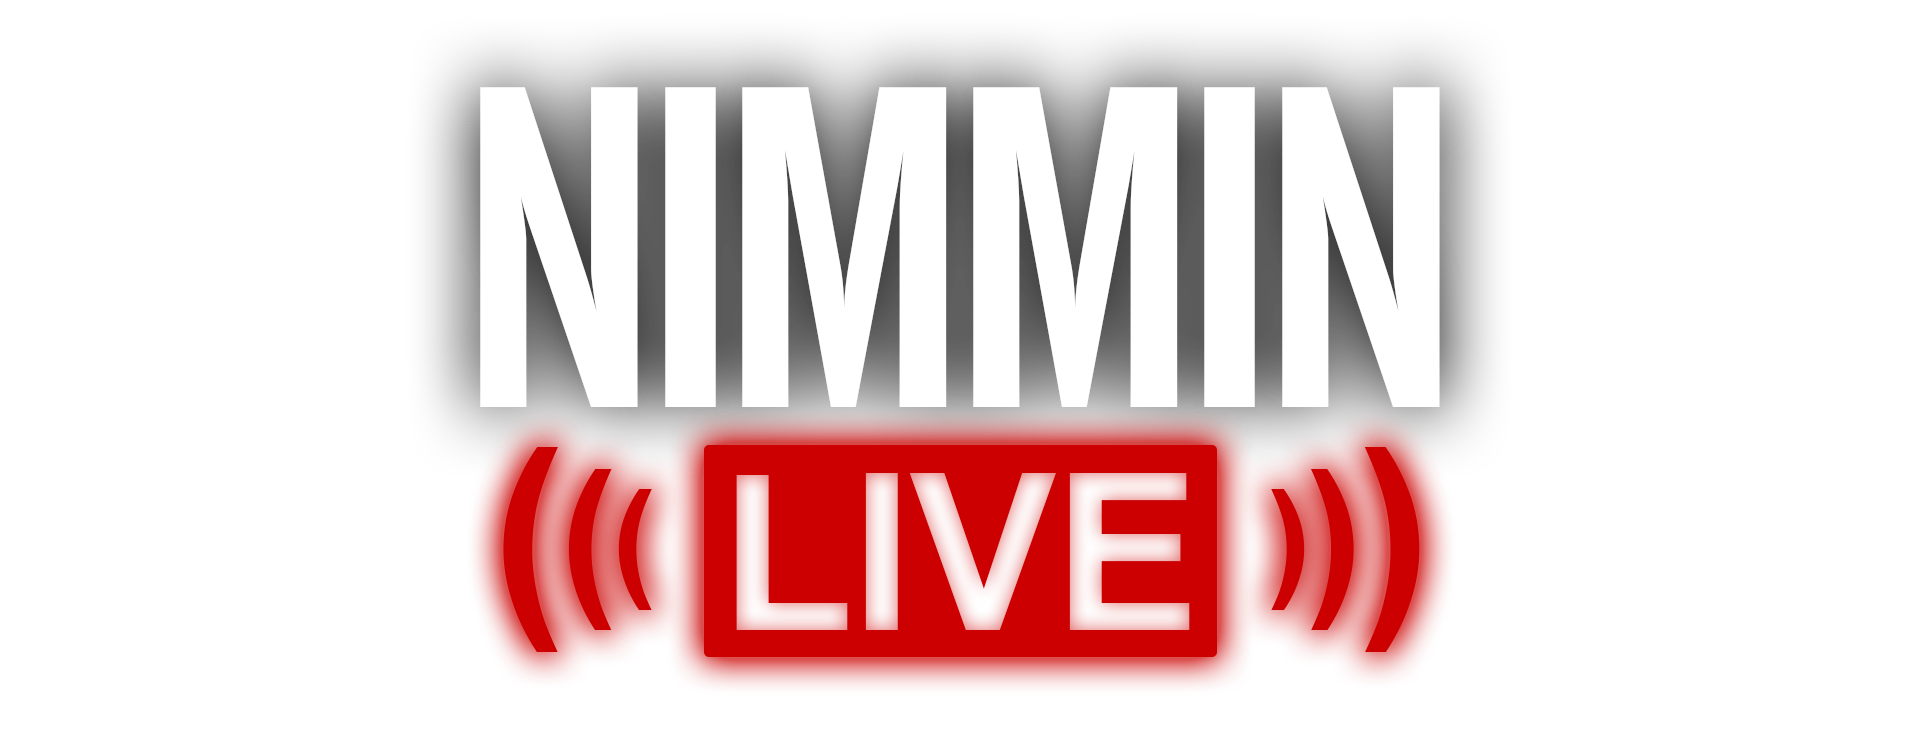 Nimmin Live - Learn About YouTube